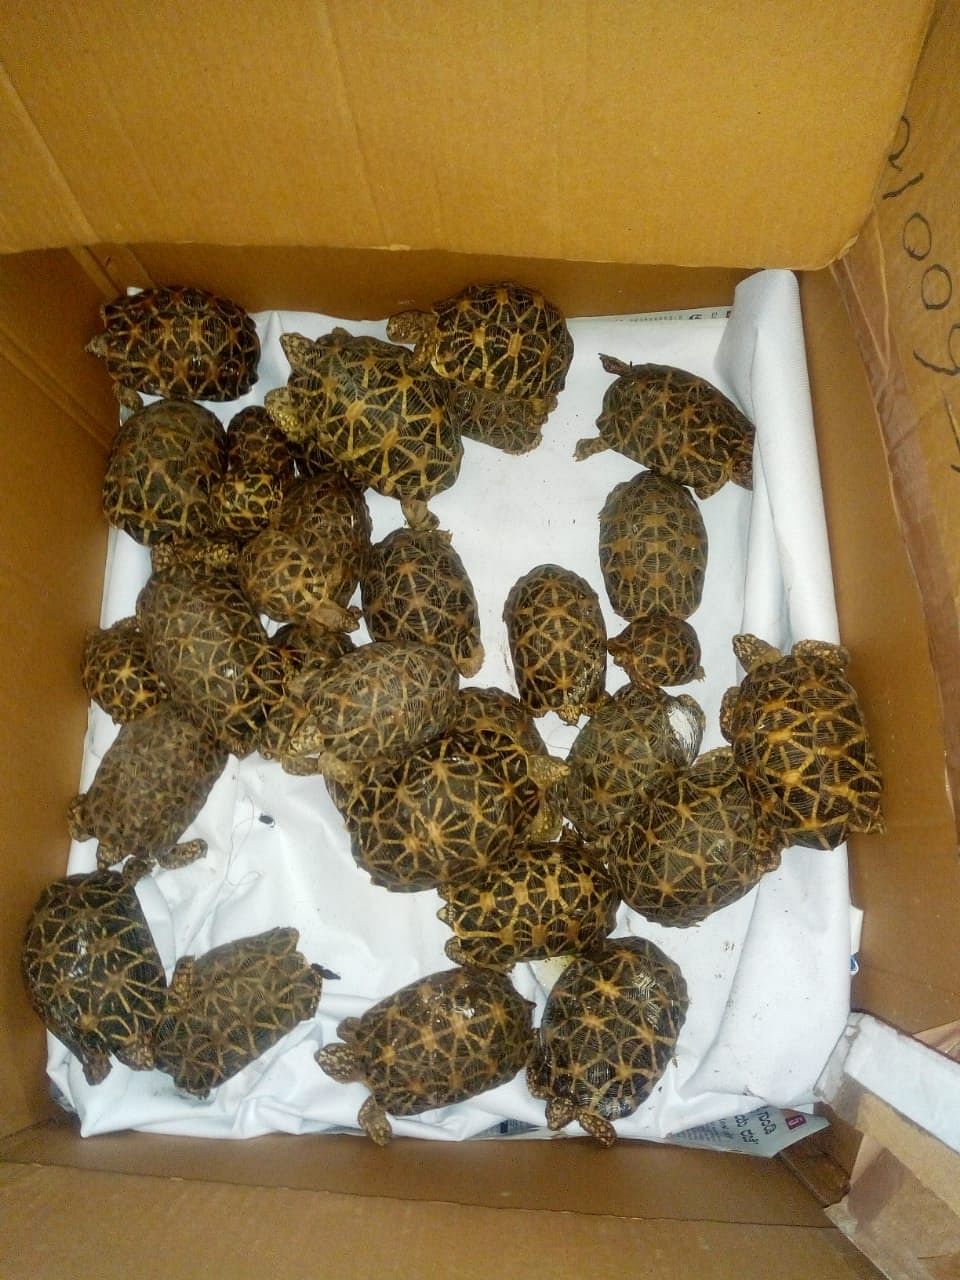 Acting on a tip-off, forest officials arrested a man who was said to be illegally transporting star tortoises early on Friday morning. (DH Photo)